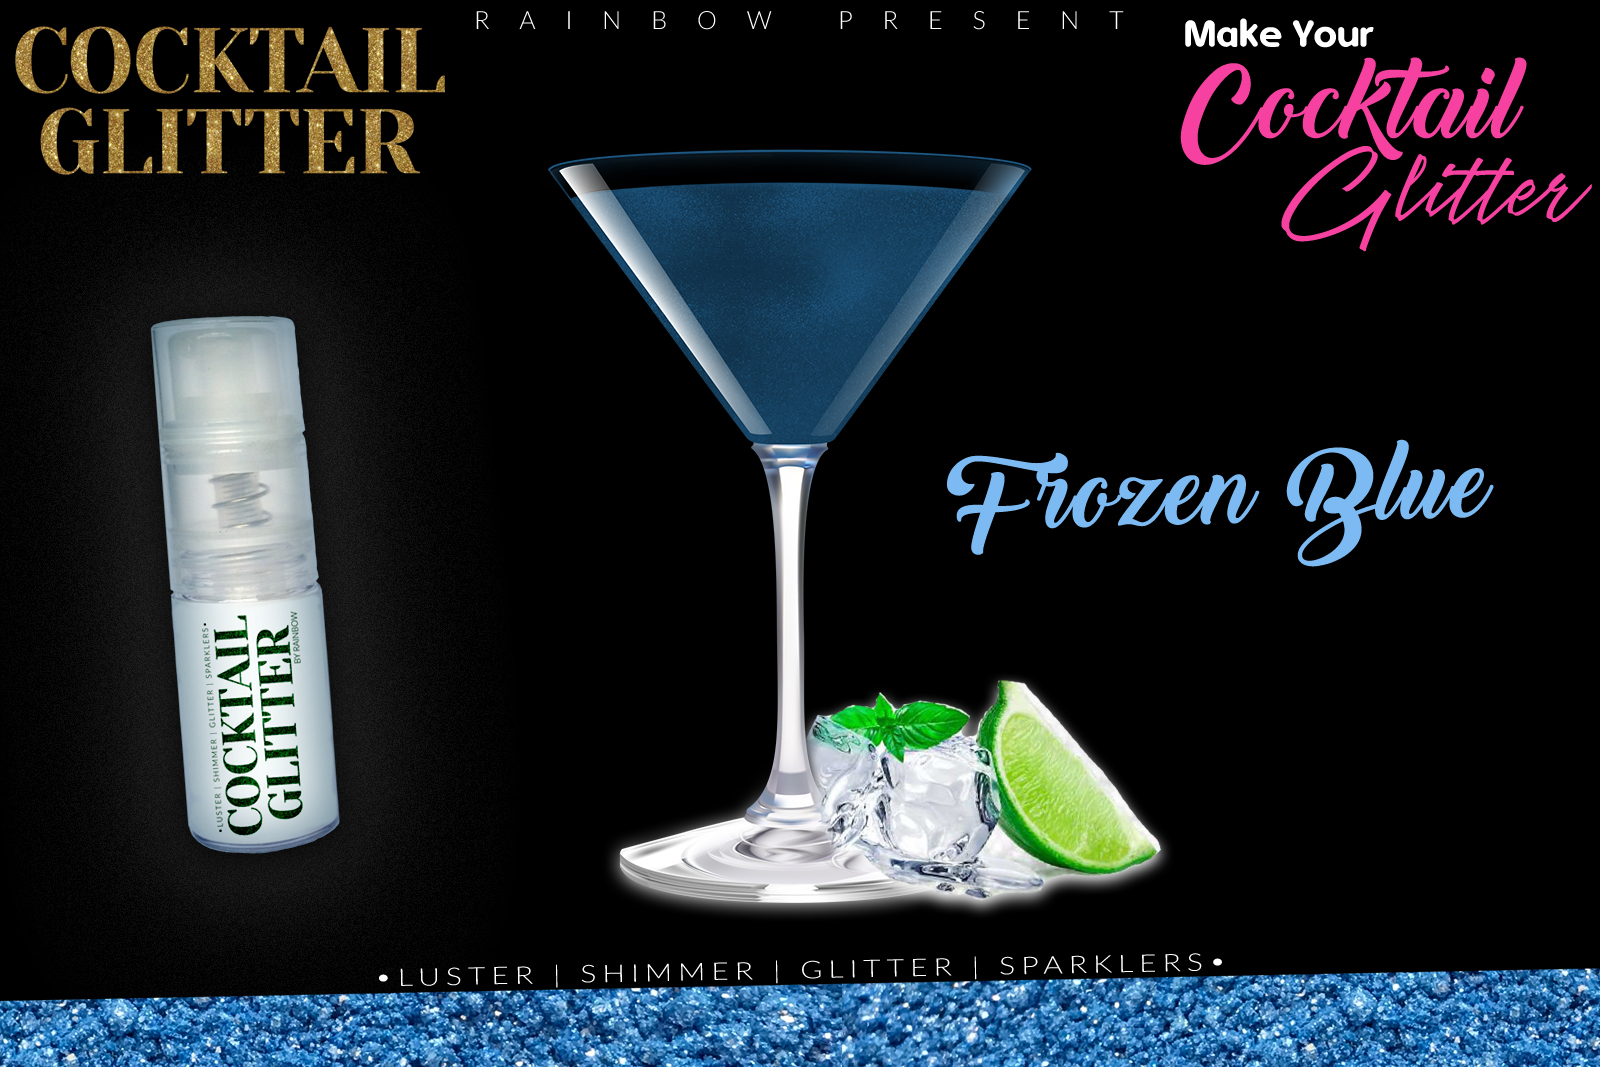 Glitzy Cocktail Glitter and Sparkling Effect | Edible | Frozen Blue